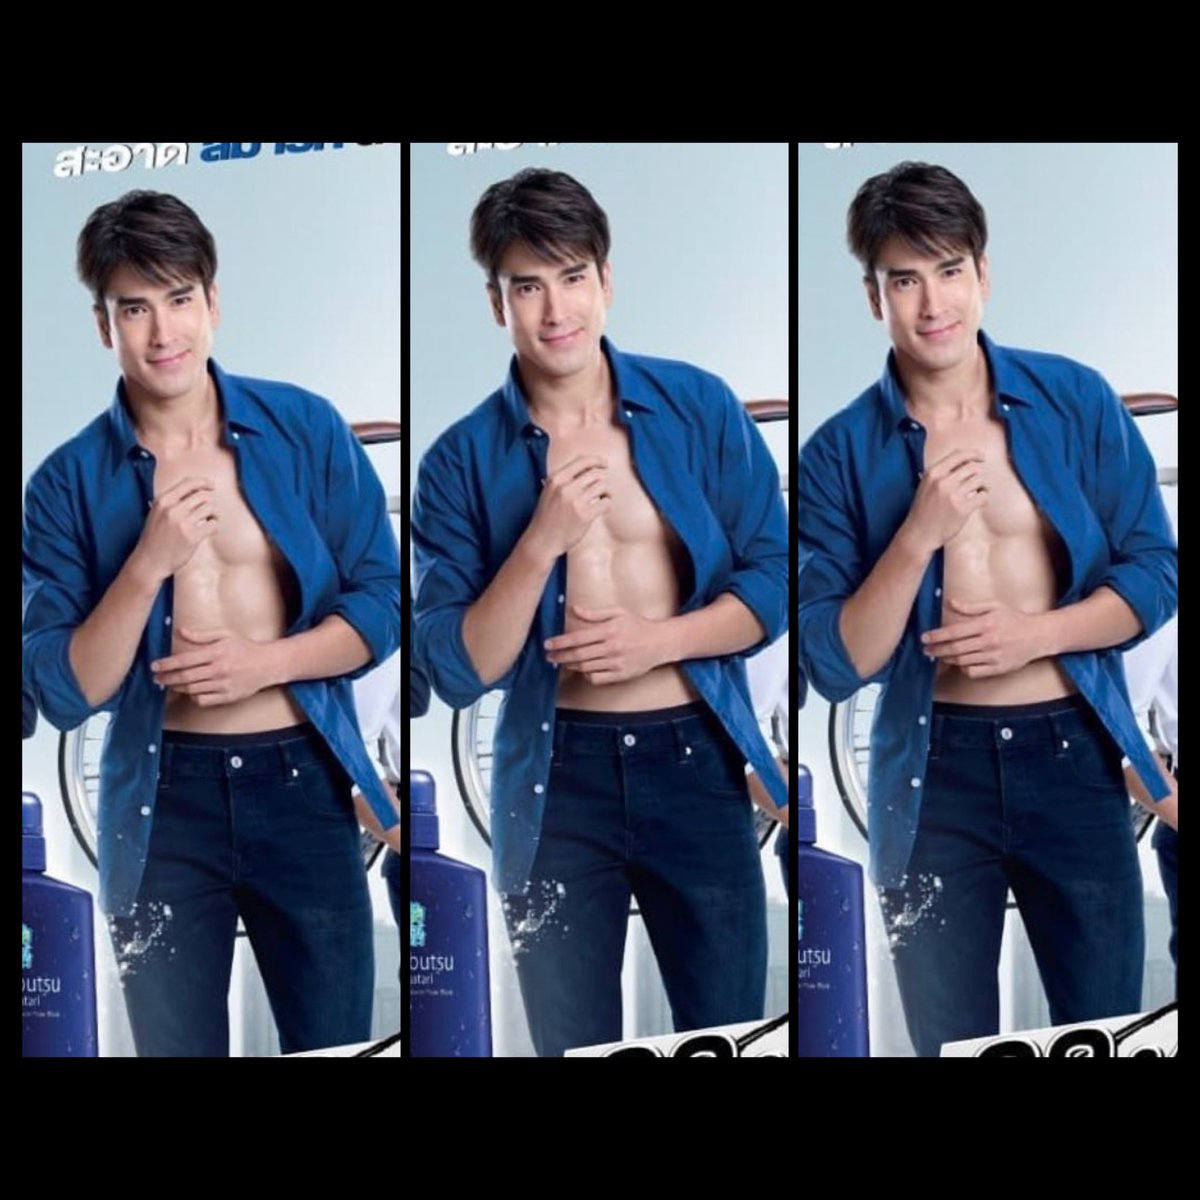 Hi guys! Please don’t forget to vote for Nadech Kugimiya.  #100SexiestMenInTheWorld2020Please LIKE and COMMENT. Can we make at least 10 comments a day? PLEASEEEE! THANK YOU SO MUCH! #ณเดชน์คูกิมิยะ  #ณเดชน์  #nadech LINKS: http://instagram.com/p/CDYF0HrJnAS/  http://instagram.com/p/CDYF03pp3Tq/ 